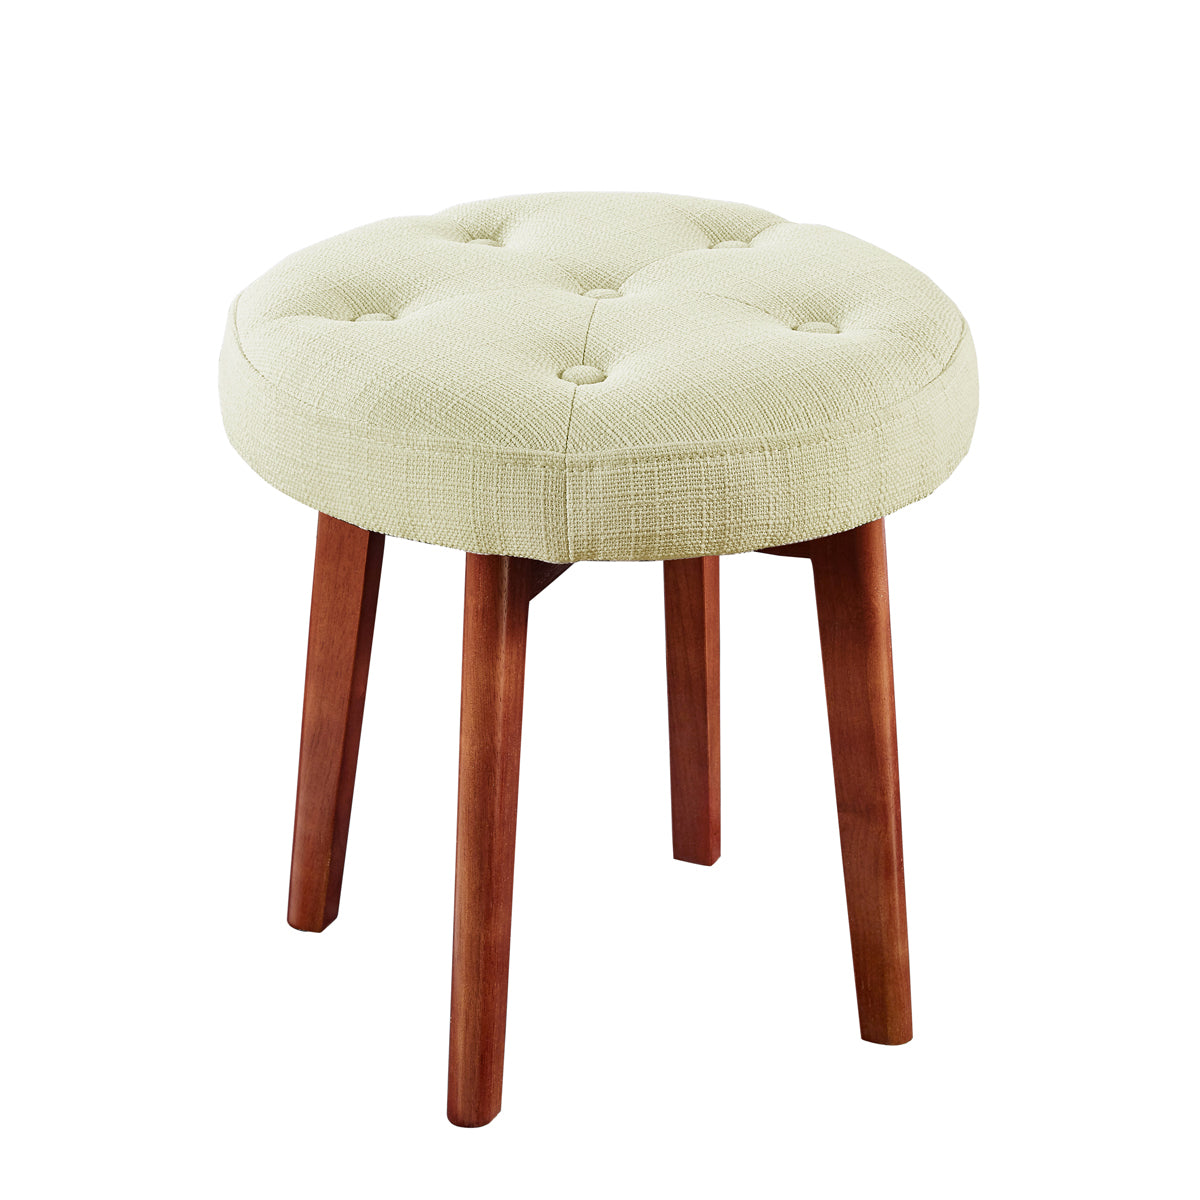 Vintage Round Wooden Leg Upholstered Cushioned Foot Stool